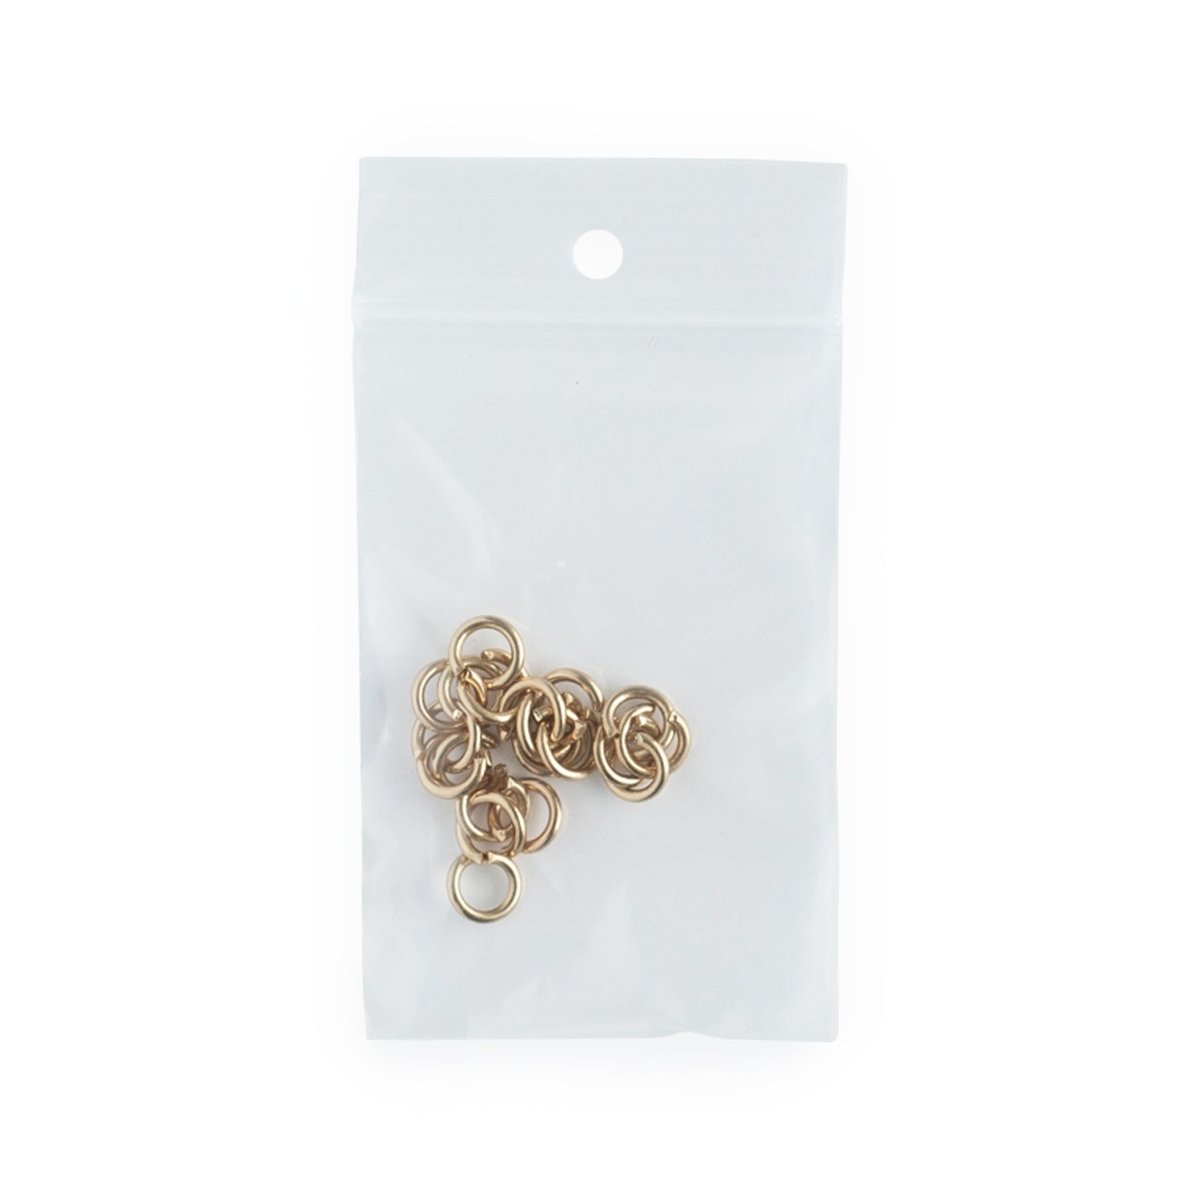 Accessories Jump Rings 8mm from Cara & Co Craft Supply